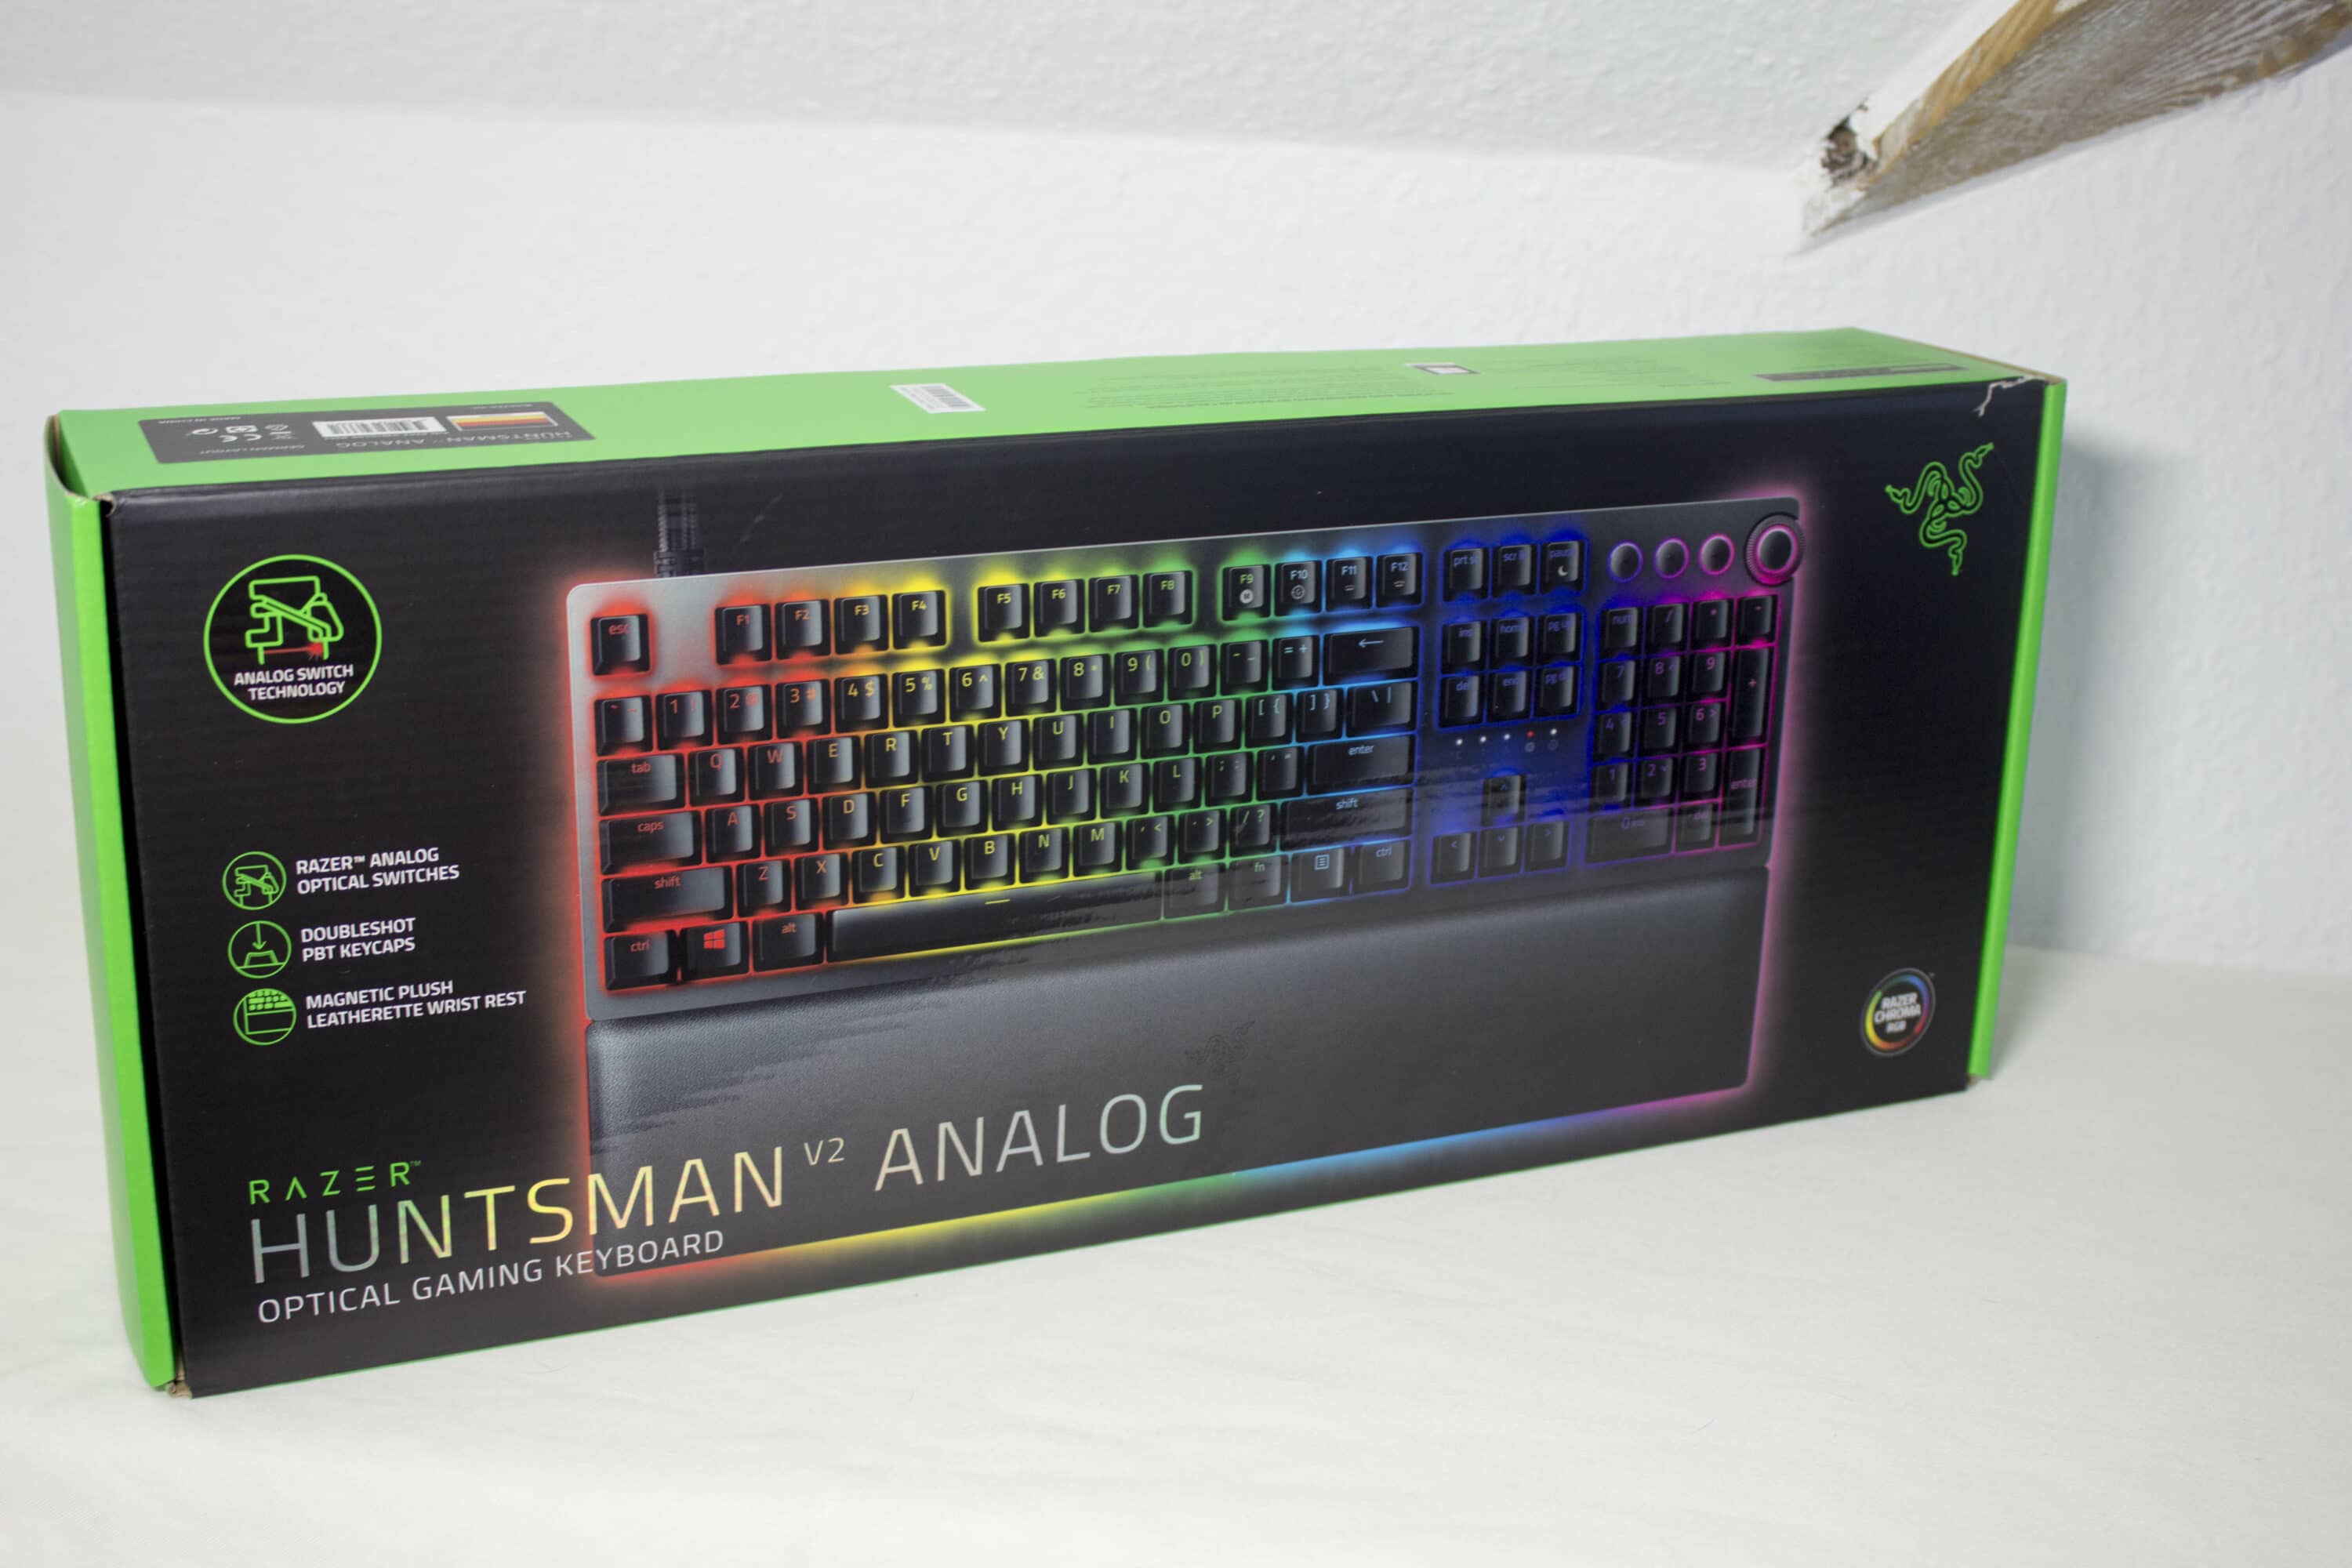 Razer Huntsman V2 in controllers What review: and keyboards common? do in have Analog